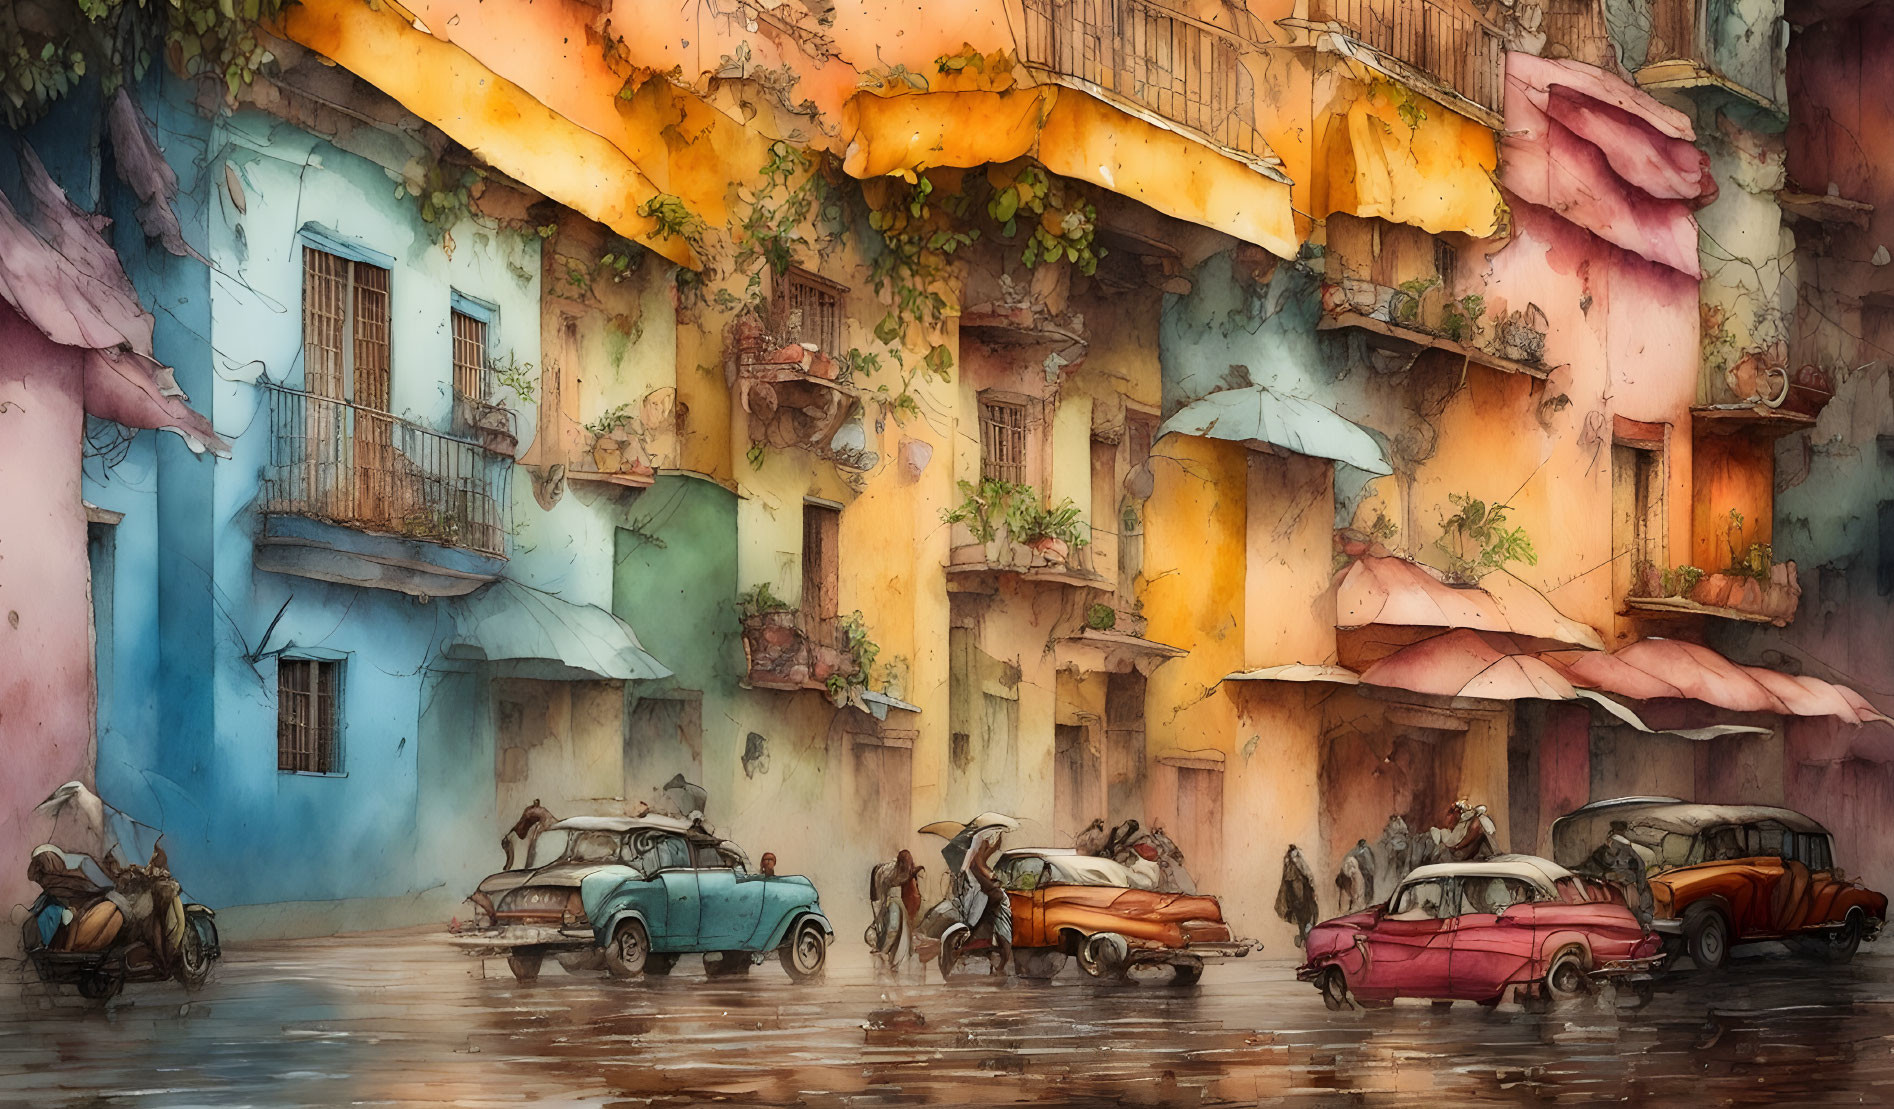 Colorful Watercolor Street Scene with Vintage Cars and Aged Buildings